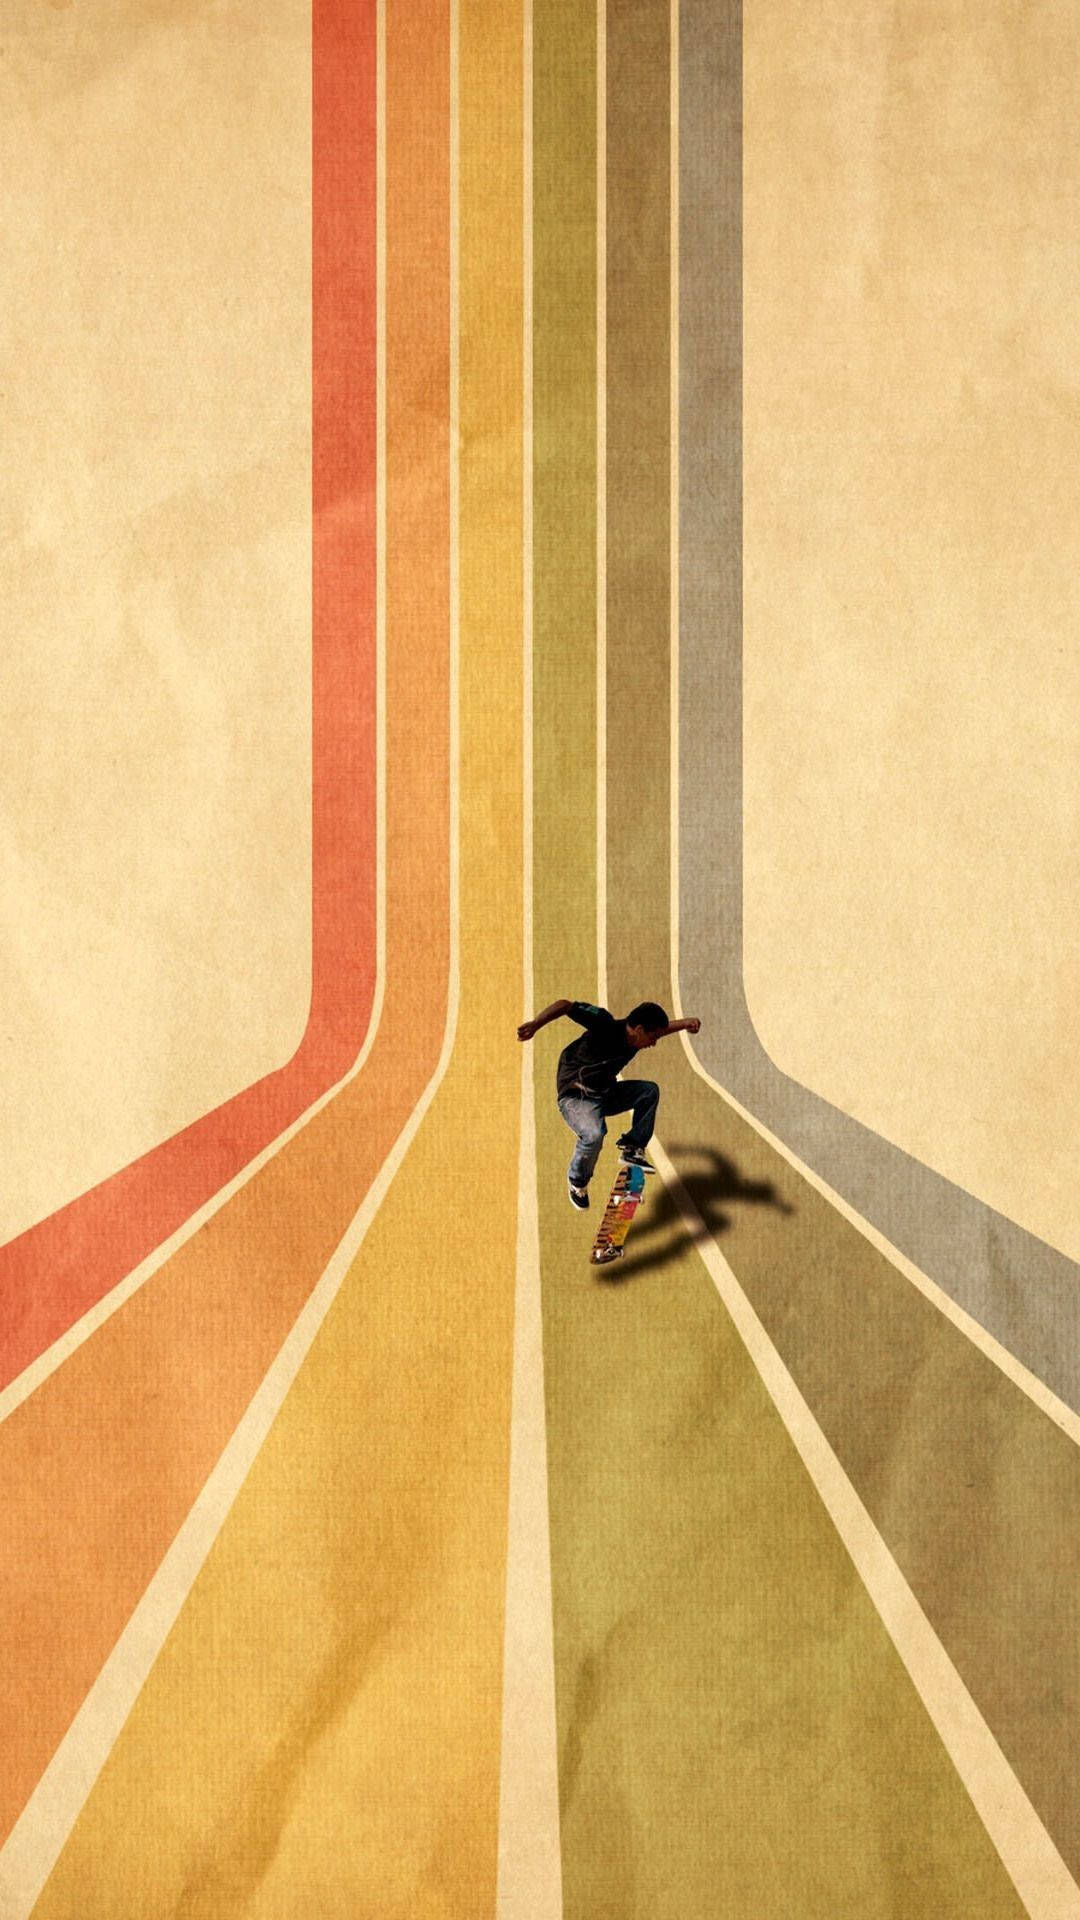 Colorful Lines For Skateboard Iphone Wallpaper